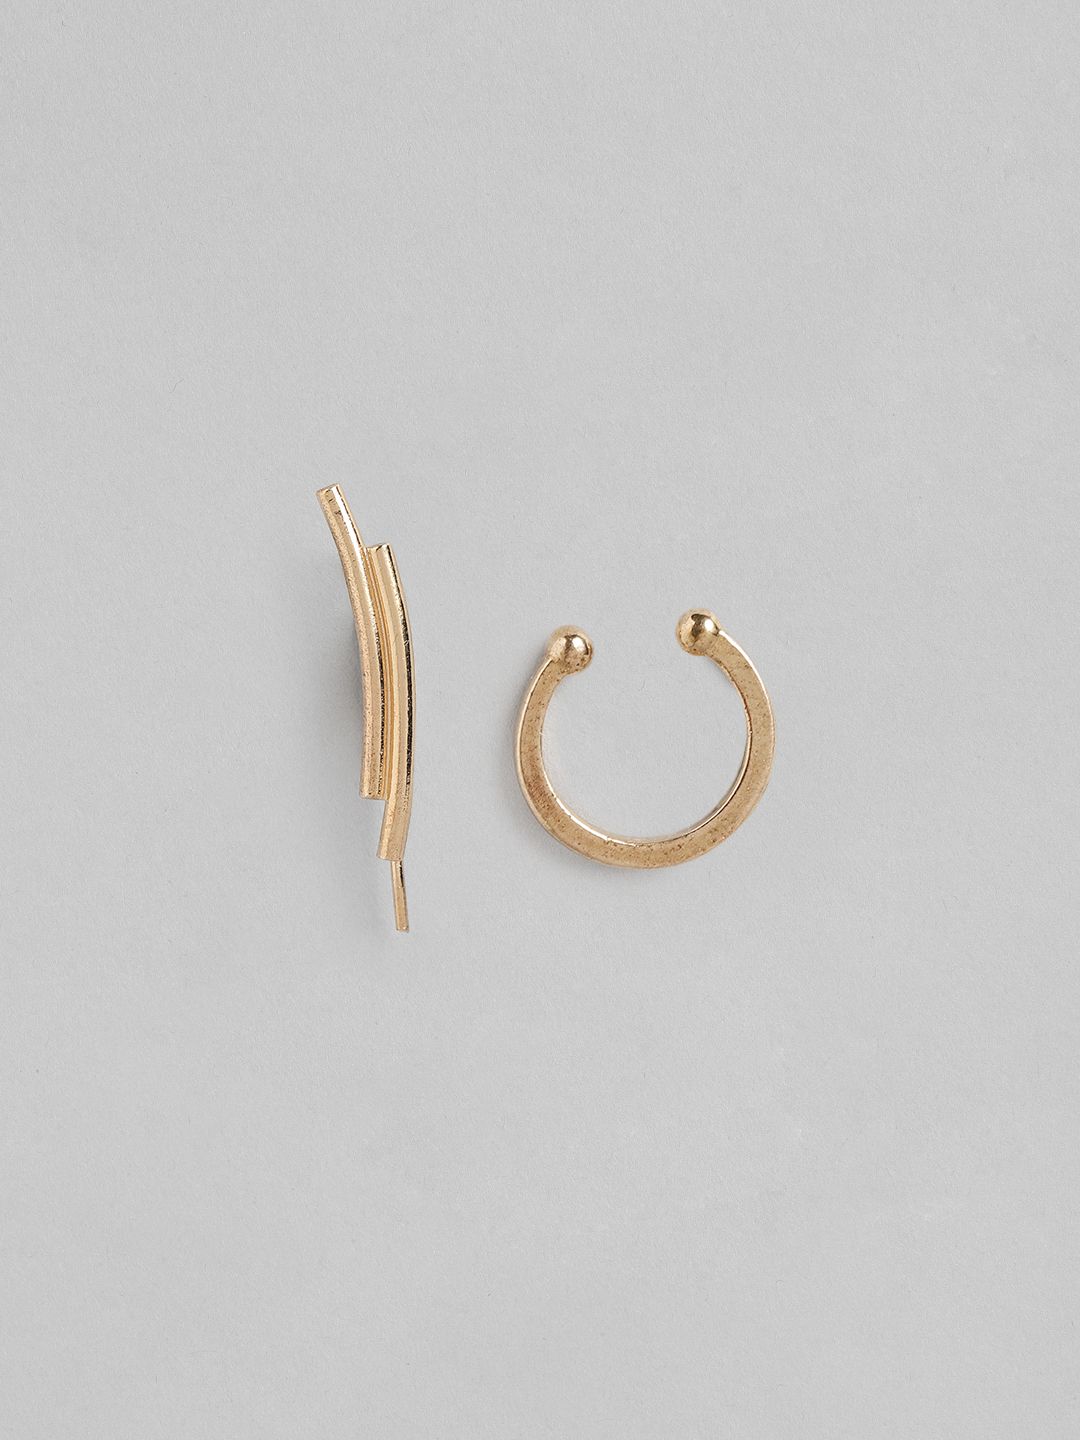 20Dresses Set of 2 Gold-Toned Circular Ear Cuff Earrings Price in India